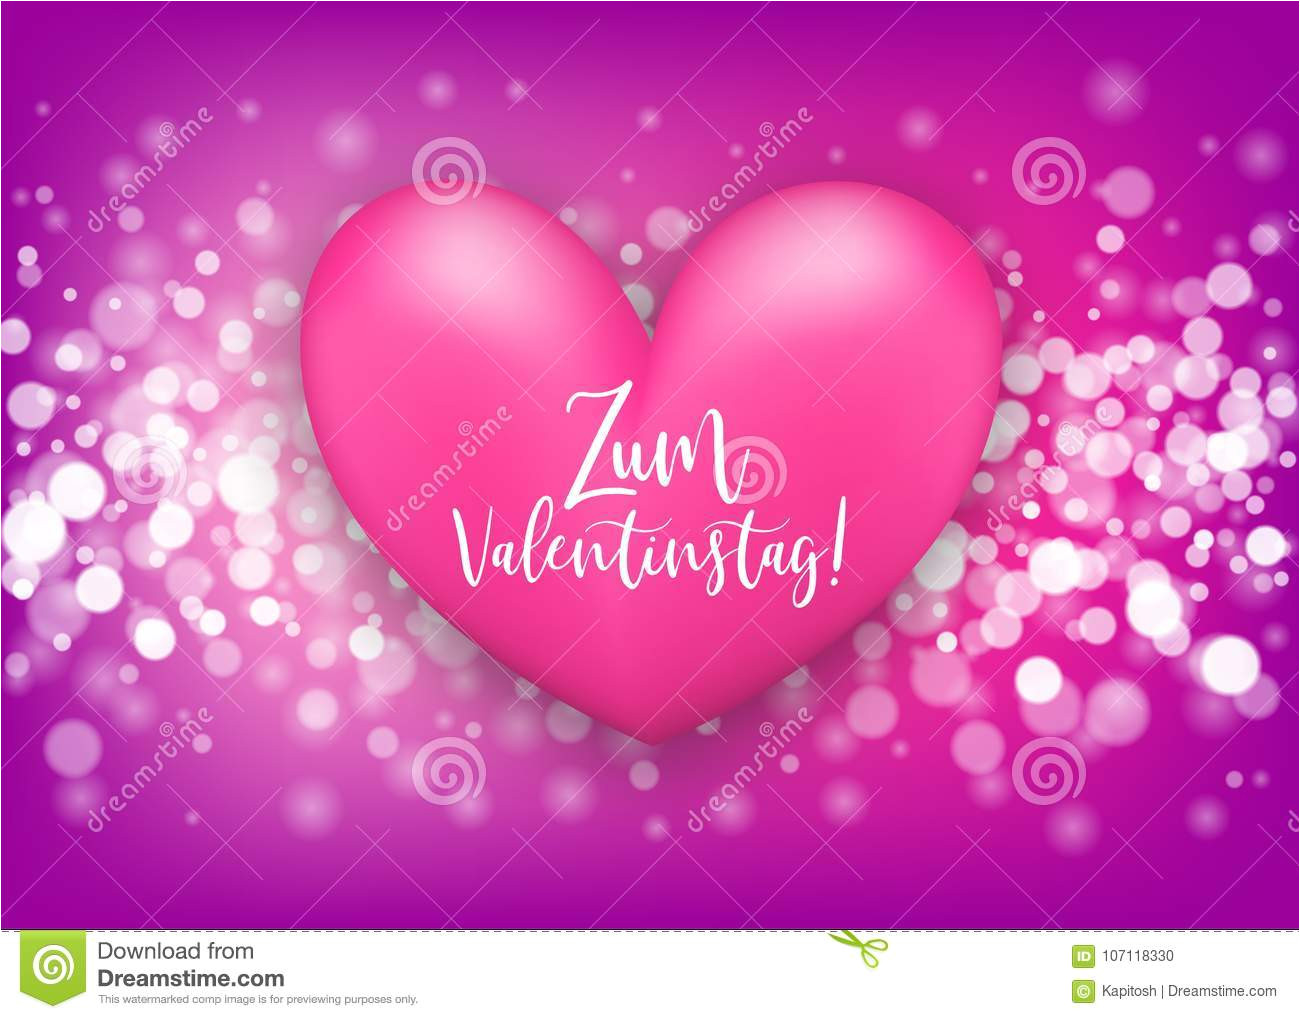 happy valentines day heart greeting card happy valentines day zum valentinstag german language realistic d heart romantic sparkle 107118330 jpg